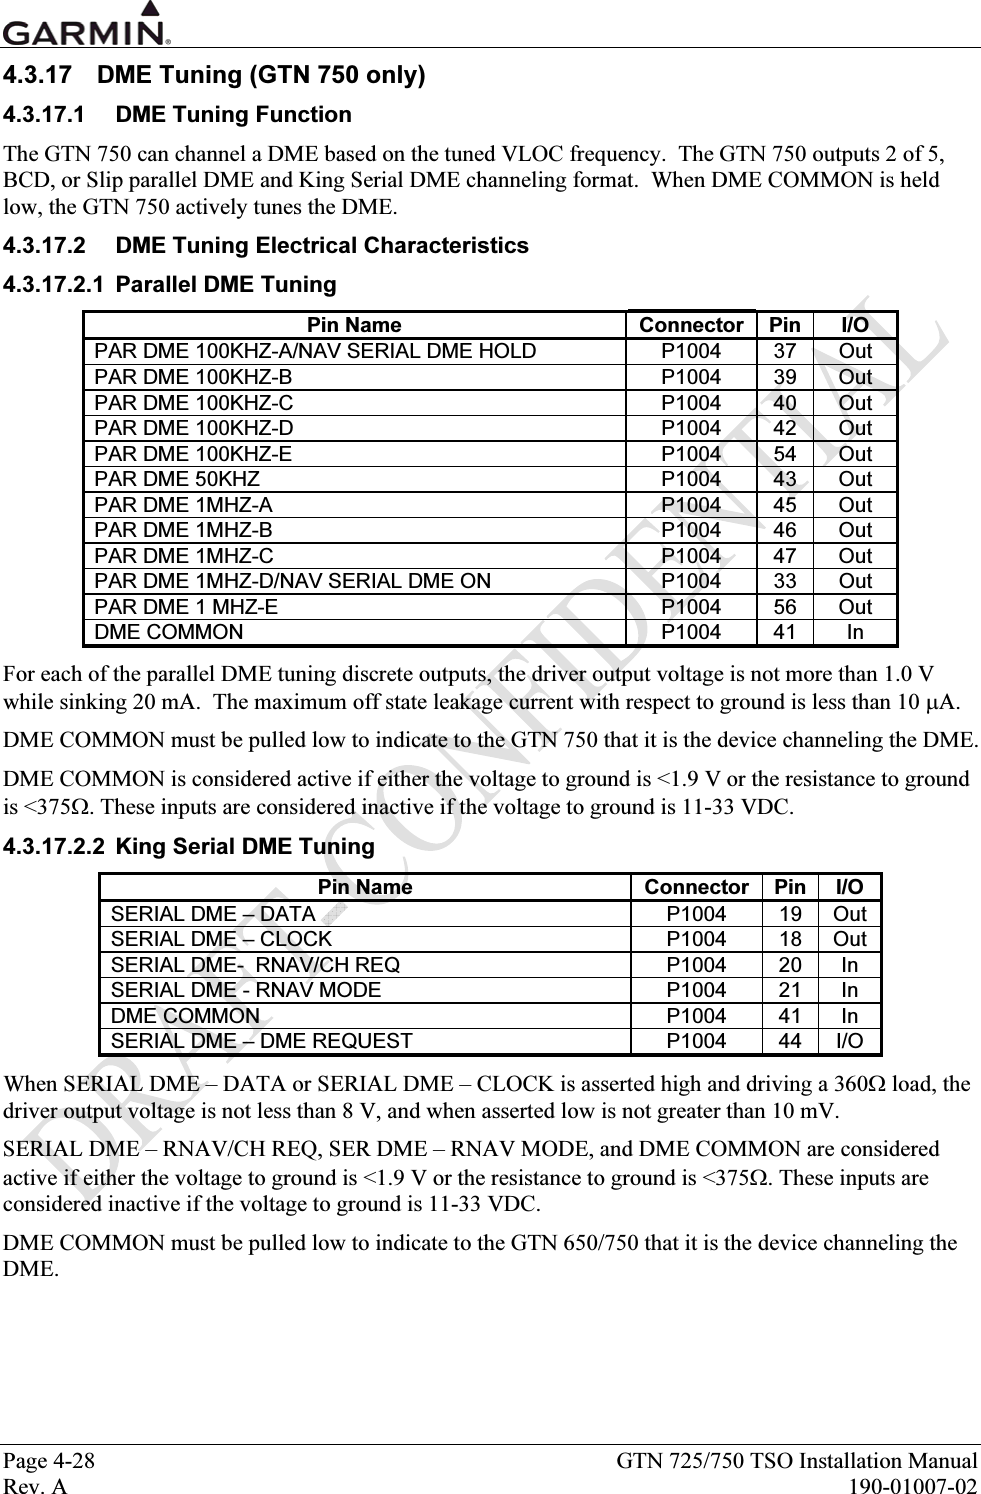  Page 4-28  GTN 725/750 TSO Installation Manual Rev. A  190-01007-02 4.3.17  DME Tuning (GTN 750 only) 4.3.17.1  DME Tuning Function The GTN 750 can channel a DME based on the tuned VLOC frequency.  The GTN 750 outputs 2 of 5, BCD, or Slip parallel DME and King Serial DME channeling format.  When DME COMMON is held low, the GTN 750 actively tunes the DME. 4.3.17.2  DME Tuning Electrical Characteristics 4.3.17.2.1  Parallel DME Tuning Pin Name  Connector  Pin  I/O PAR DME 100KHZ-A/NAV SERIAL DME HOLD  P1004  37  Out PAR DME 100KHZ-B  P1004  39  Out PAR DME 100KHZ-C  P1004  40  Out PAR DME 100KHZ-D  P1004  42  Out PAR DME 100KHZ-E  P1004  54  Out PAR DME 50KHZ  P1004  43  Out PAR DME 1MHZ-A  P1004  45  Out PAR DME 1MHZ-B  P1004  46  Out PAR DME 1MHZ-C  P1004  47  Out PAR DME 1MHZ-D/NAV SERIAL DME ON  P1004  33  Out PAR DME 1 MHZ-E  P1004  56  Out DME COMMON  P1004  41  In For each of the parallel DME tuning discrete outputs, the driver output voltage is not more than 1.0 V while sinking 20 mA.  The maximum off state leakage current with respect to ground is less than 10 μA. DME COMMON must be pulled low to indicate to the GTN 750 that it is the device channeling the DME. DME COMMON is considered active if either the voltage to ground is &lt;1.9 V or the resistance to ground is &lt;375Ω. These inputs are considered inactive if the voltage to ground is 11-33 VDC. 4.3.17.2.2  King Serial DME Tuning Pin Name  Connector  Pin  I/O SERIAL DME – DATA  P1004  19  Out SERIAL DME – CLOCK  P1004  18  Out SERIAL DME-  RNAV/CH REQ  P1004  20  In SERIAL DME - RNAV MODE  P1004  21  In DME COMMON  P1004  41  In SERIAL DME – DME REQUEST  P1004  44  I/O When SERIAL DME – DATA or SERIAL DME – CLOCK is asserted high and driving a 360Ω load, the driver output voltage is not less than 8 V, and when asserted low is not greater than 10 mV. SERIAL DME – RNAV/CH REQ, SER DME – RNAV MODE, and DME COMMON are considered active if either the voltage to ground is &lt;1.9 V or the resistance to ground is &lt;375Ω. These inputs are considered inactive if the voltage to ground is 11-33 VDC. DME COMMON must be pulled low to indicate to the GTN 650/750 that it is the device channeling the DME.  